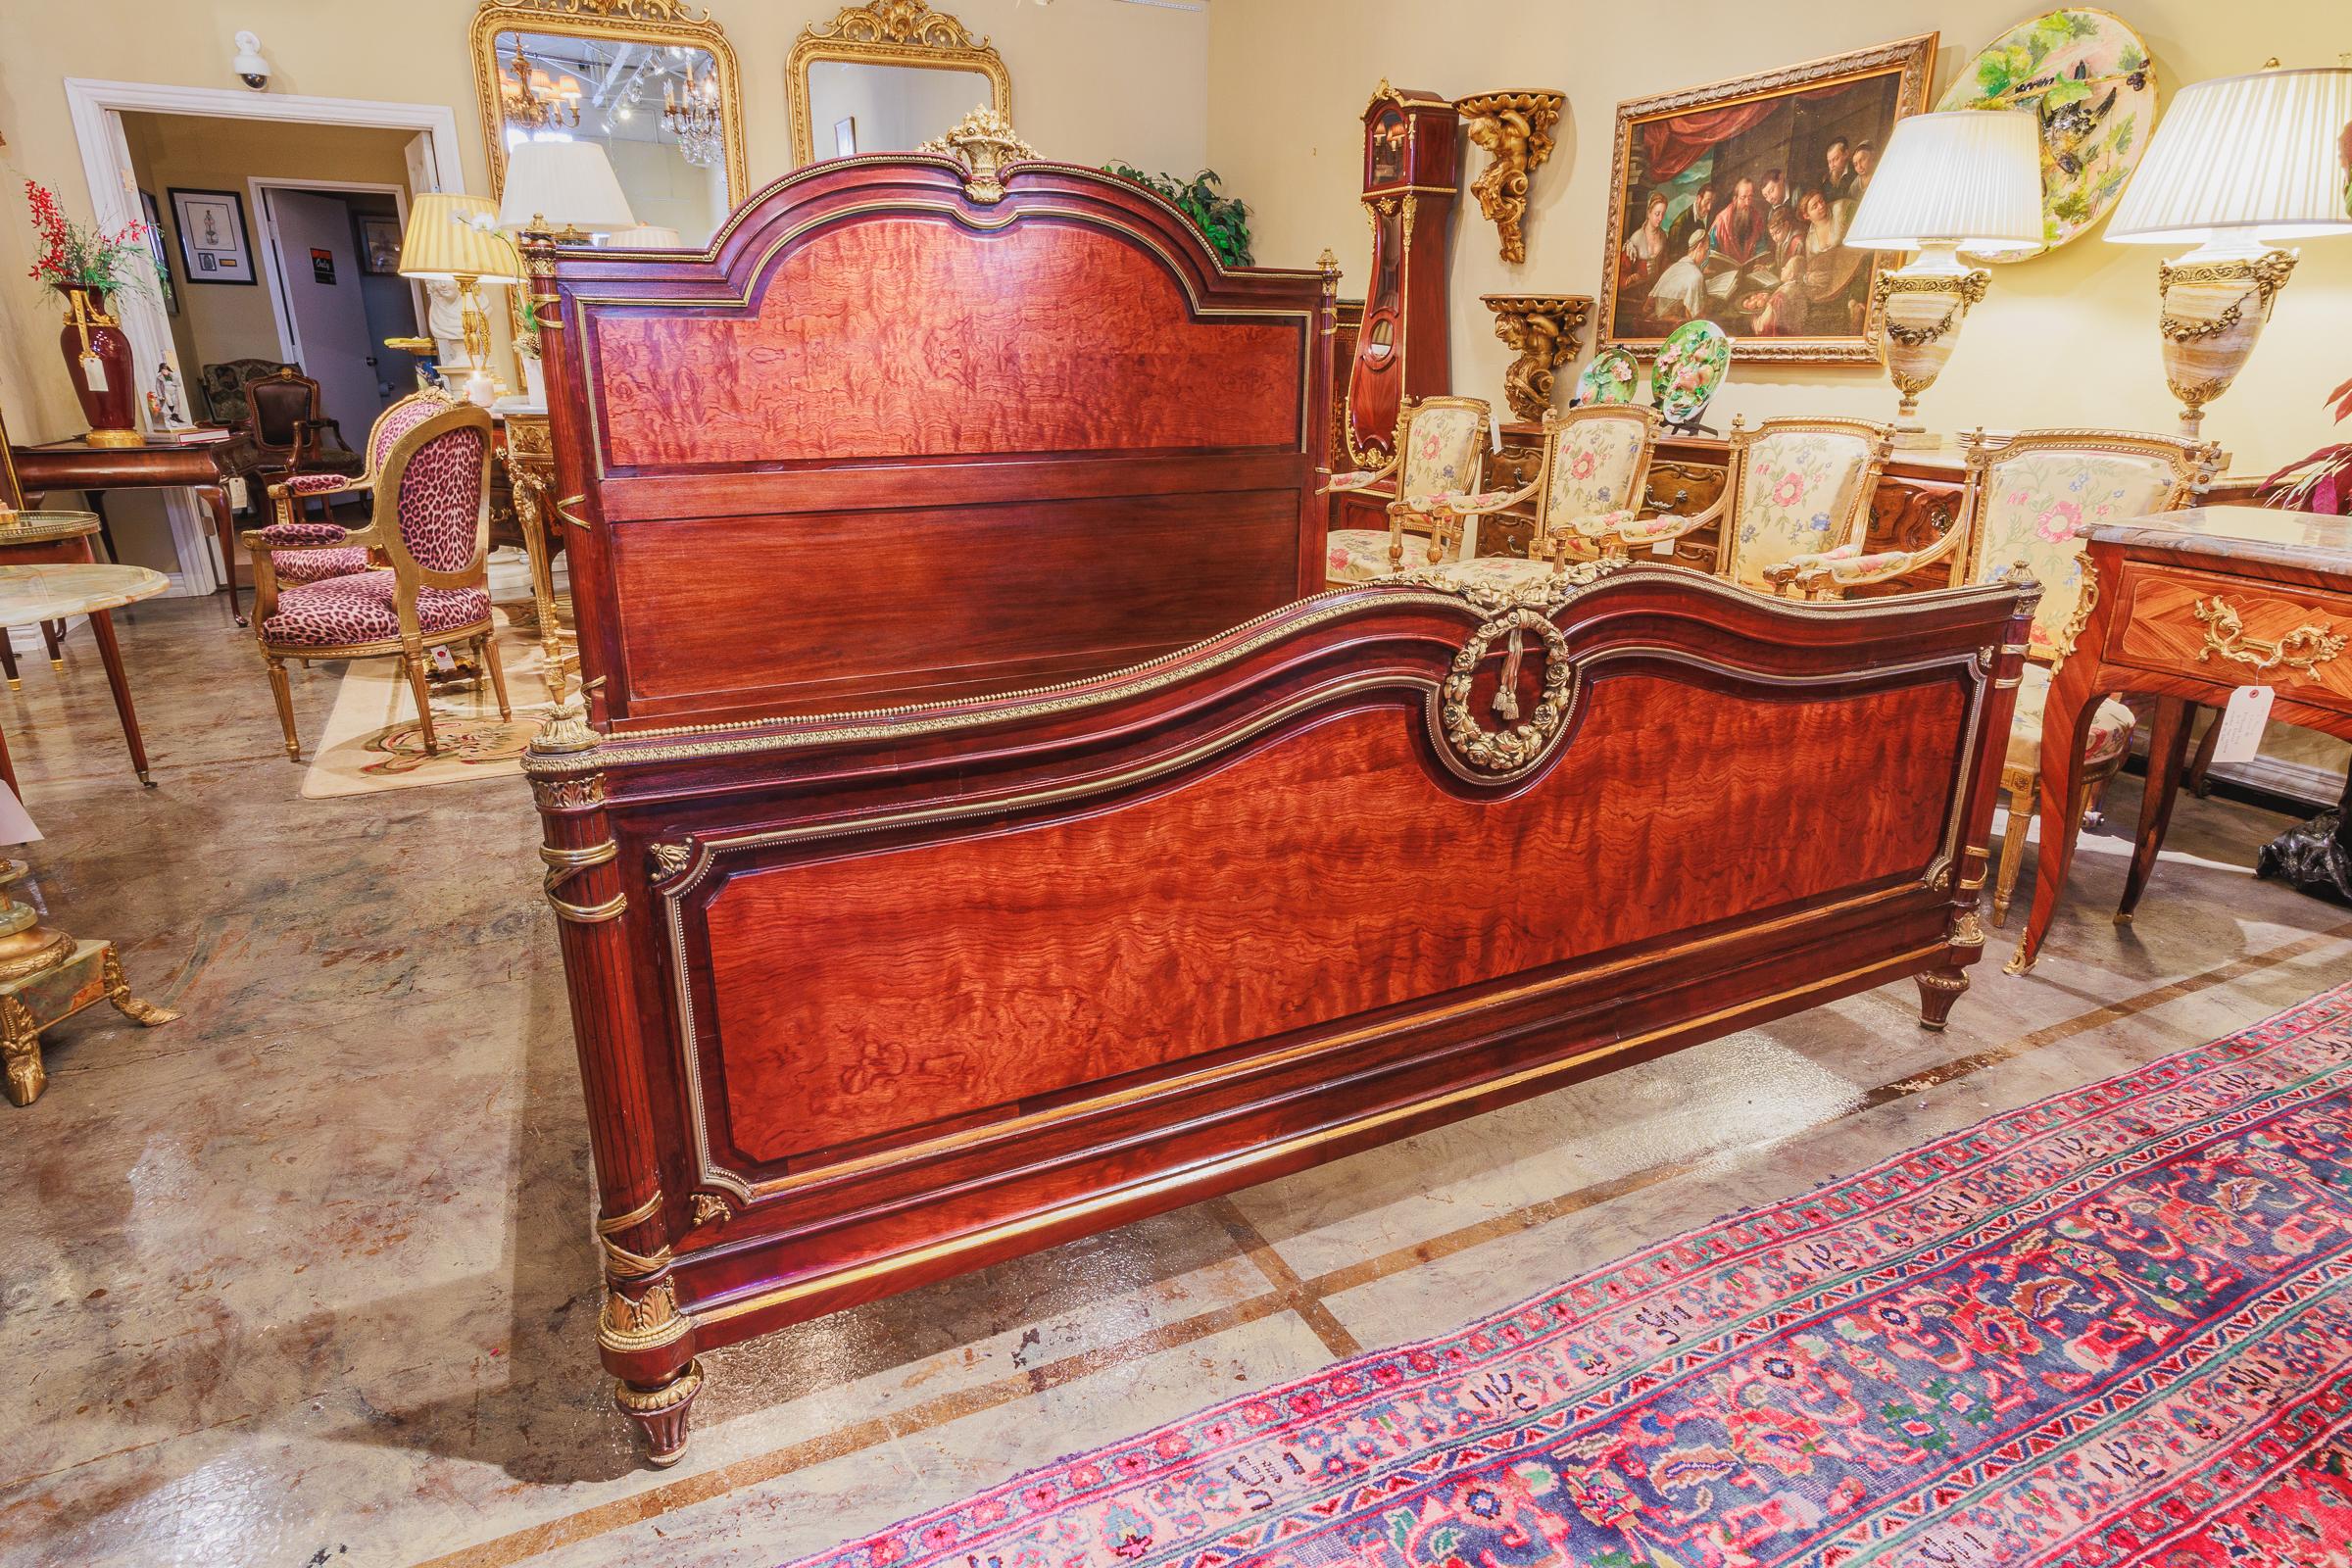 A fine 19th century French Louis XVI mahogany and gilt bronze mounted King Size bed. Fine gilt bronze mounts.